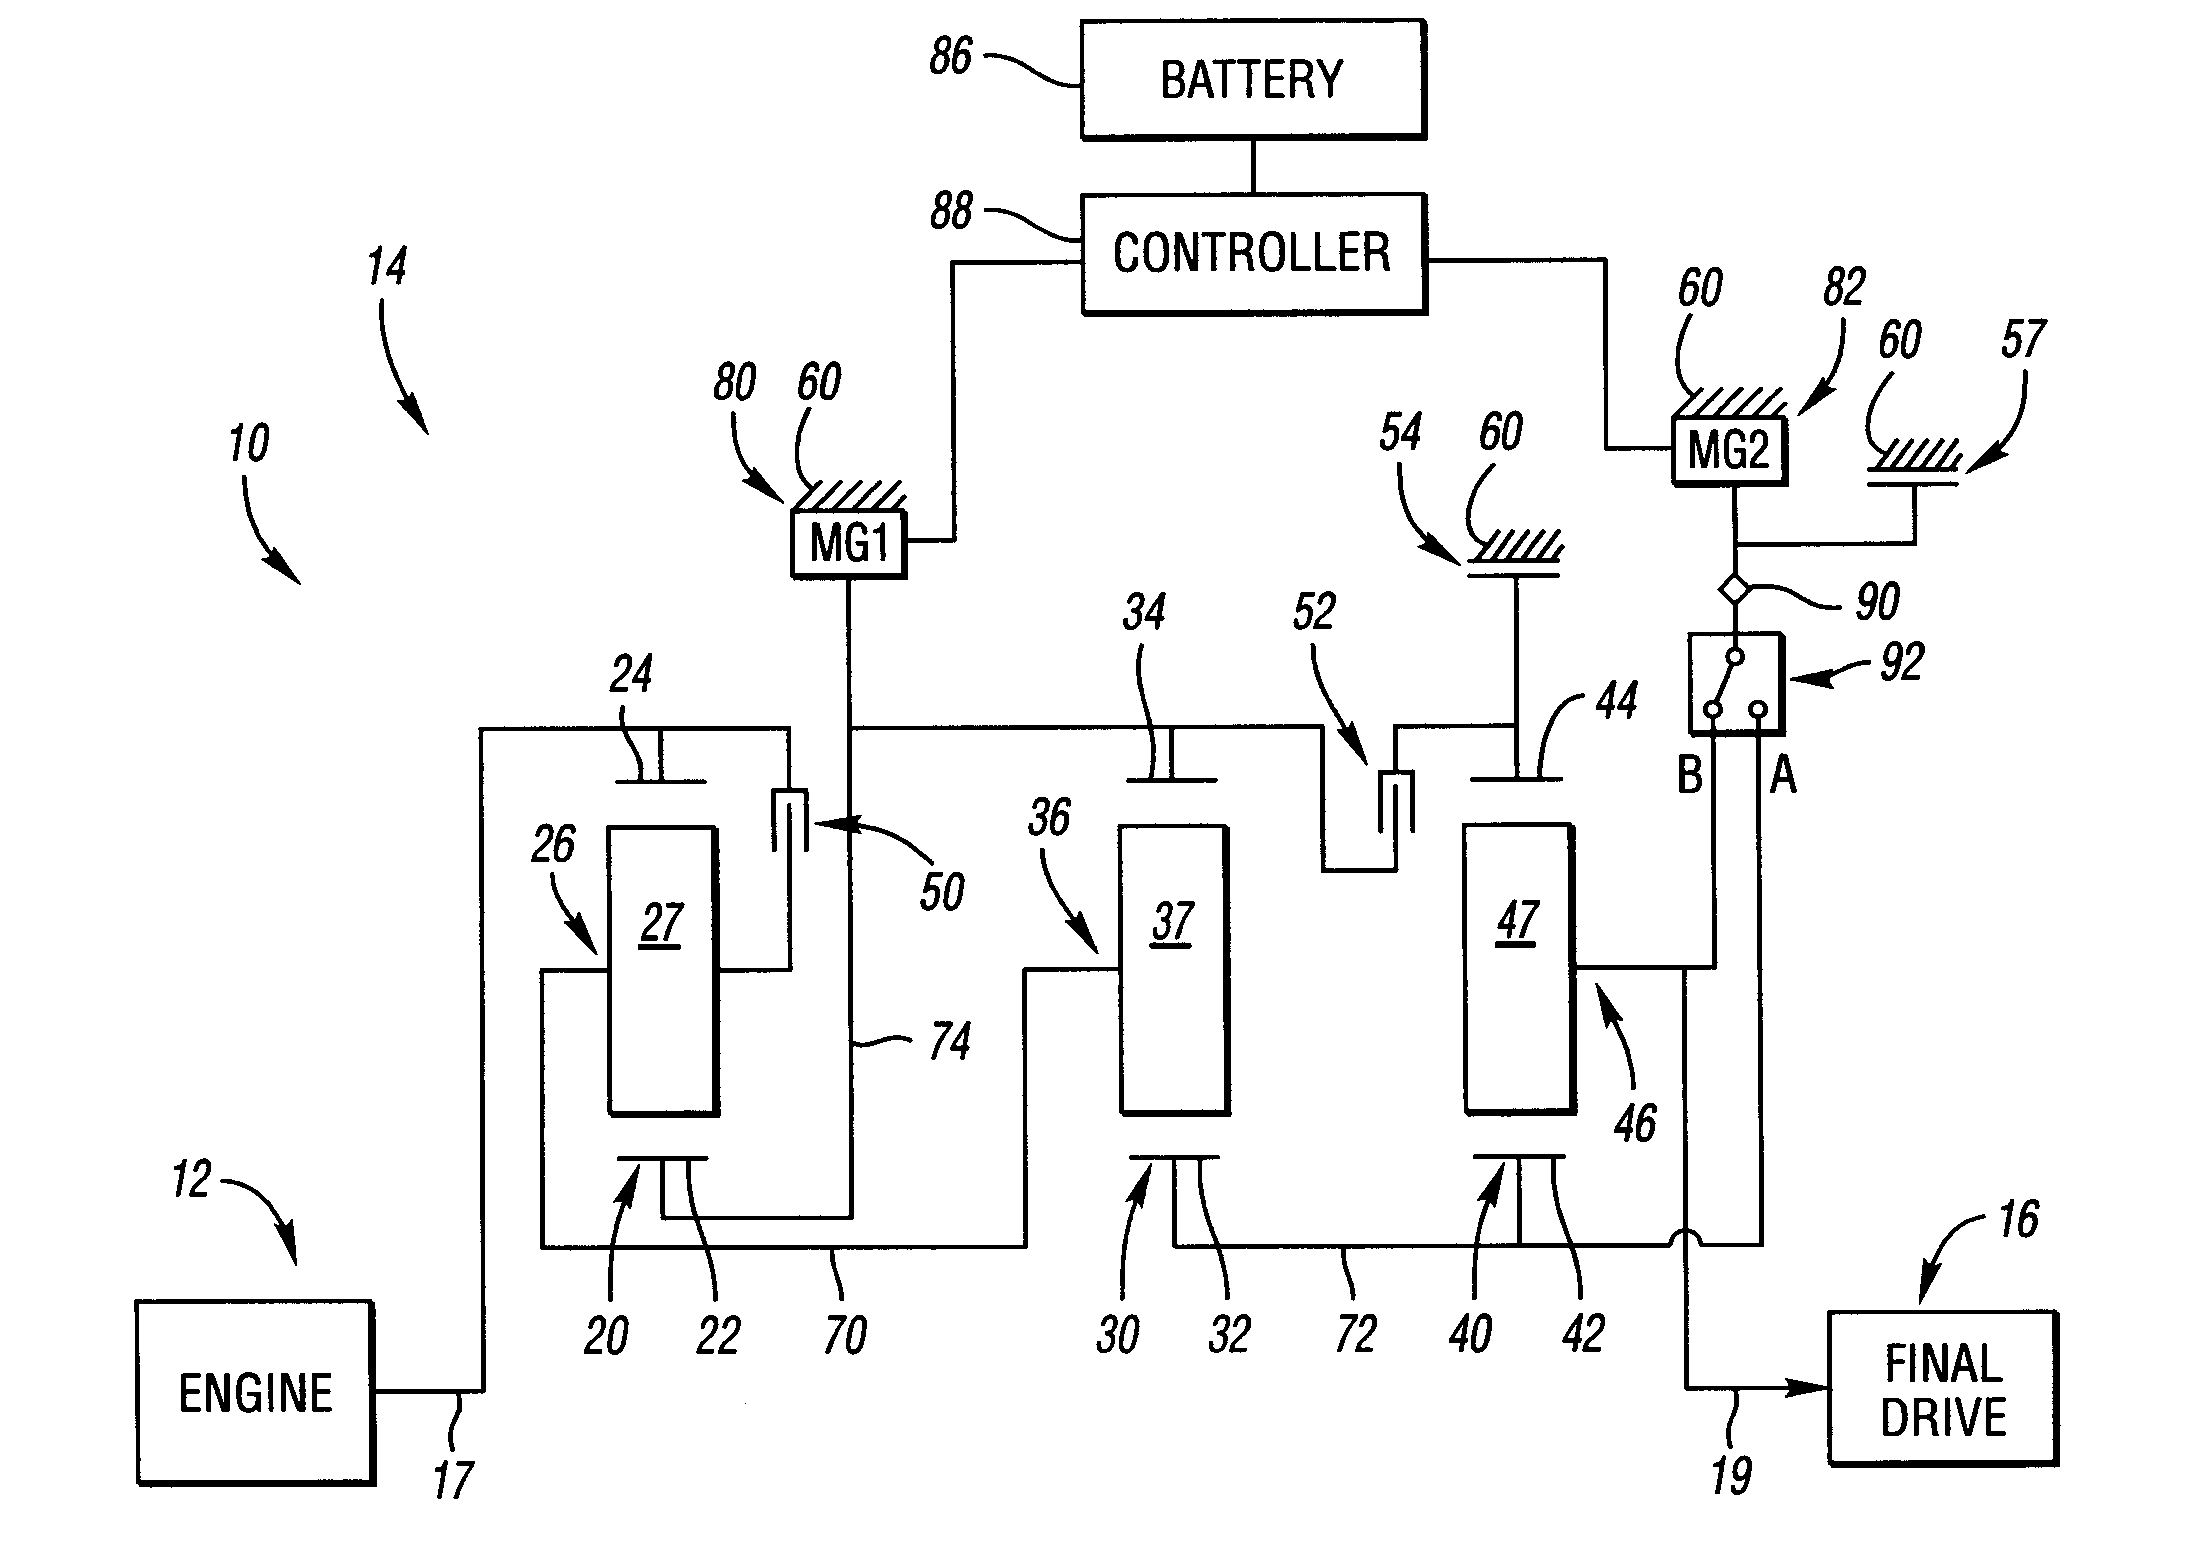 Electrically variable transmission having three planetary gear sets and clutched motor/generators